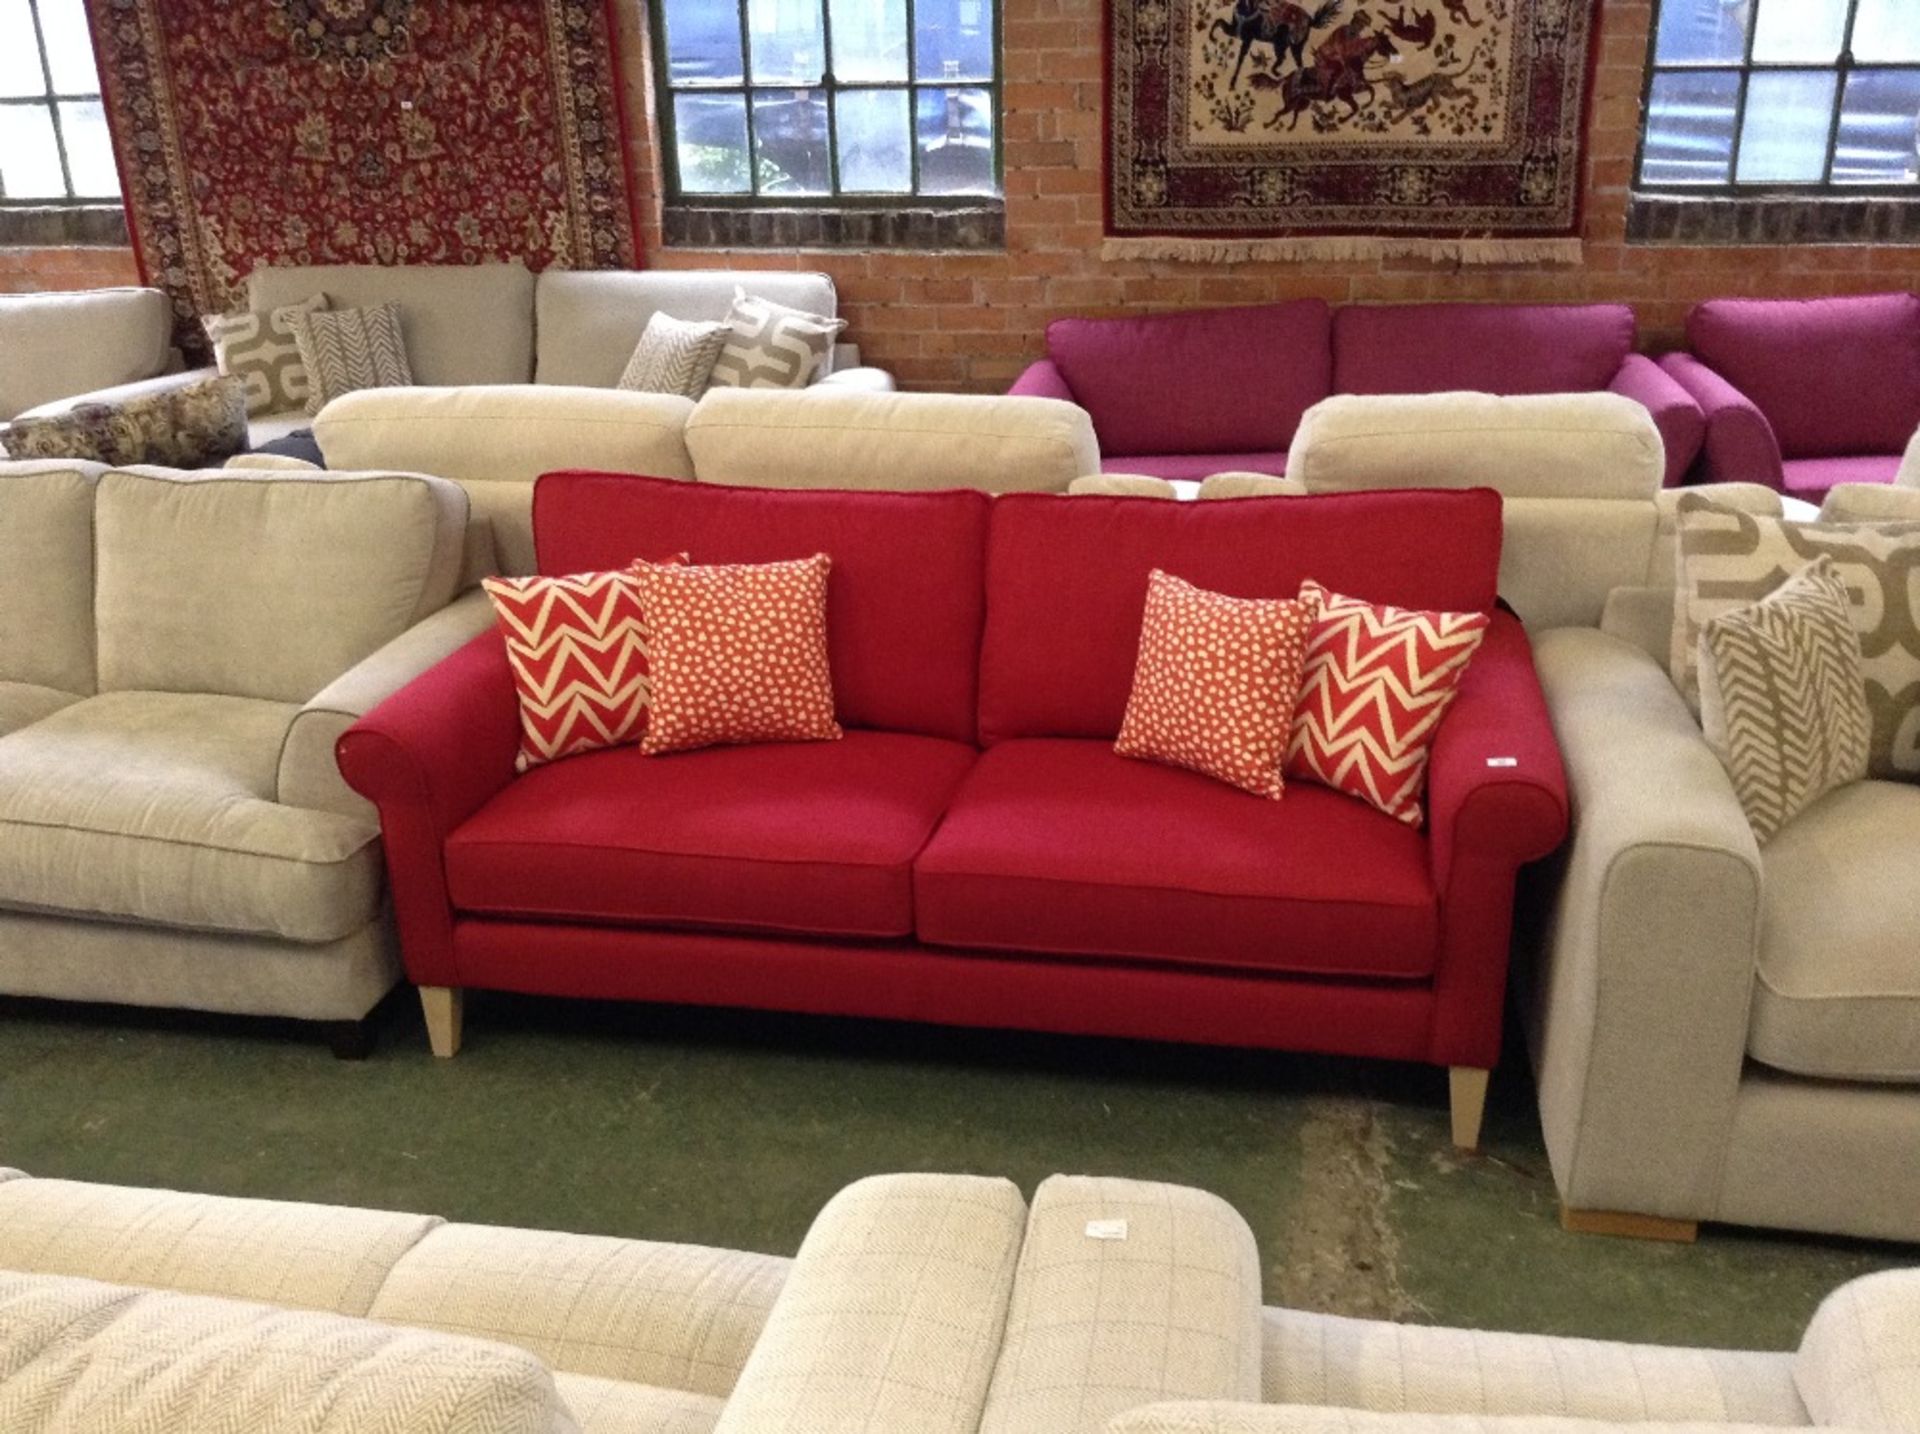 RED 3 SEATER SOFA